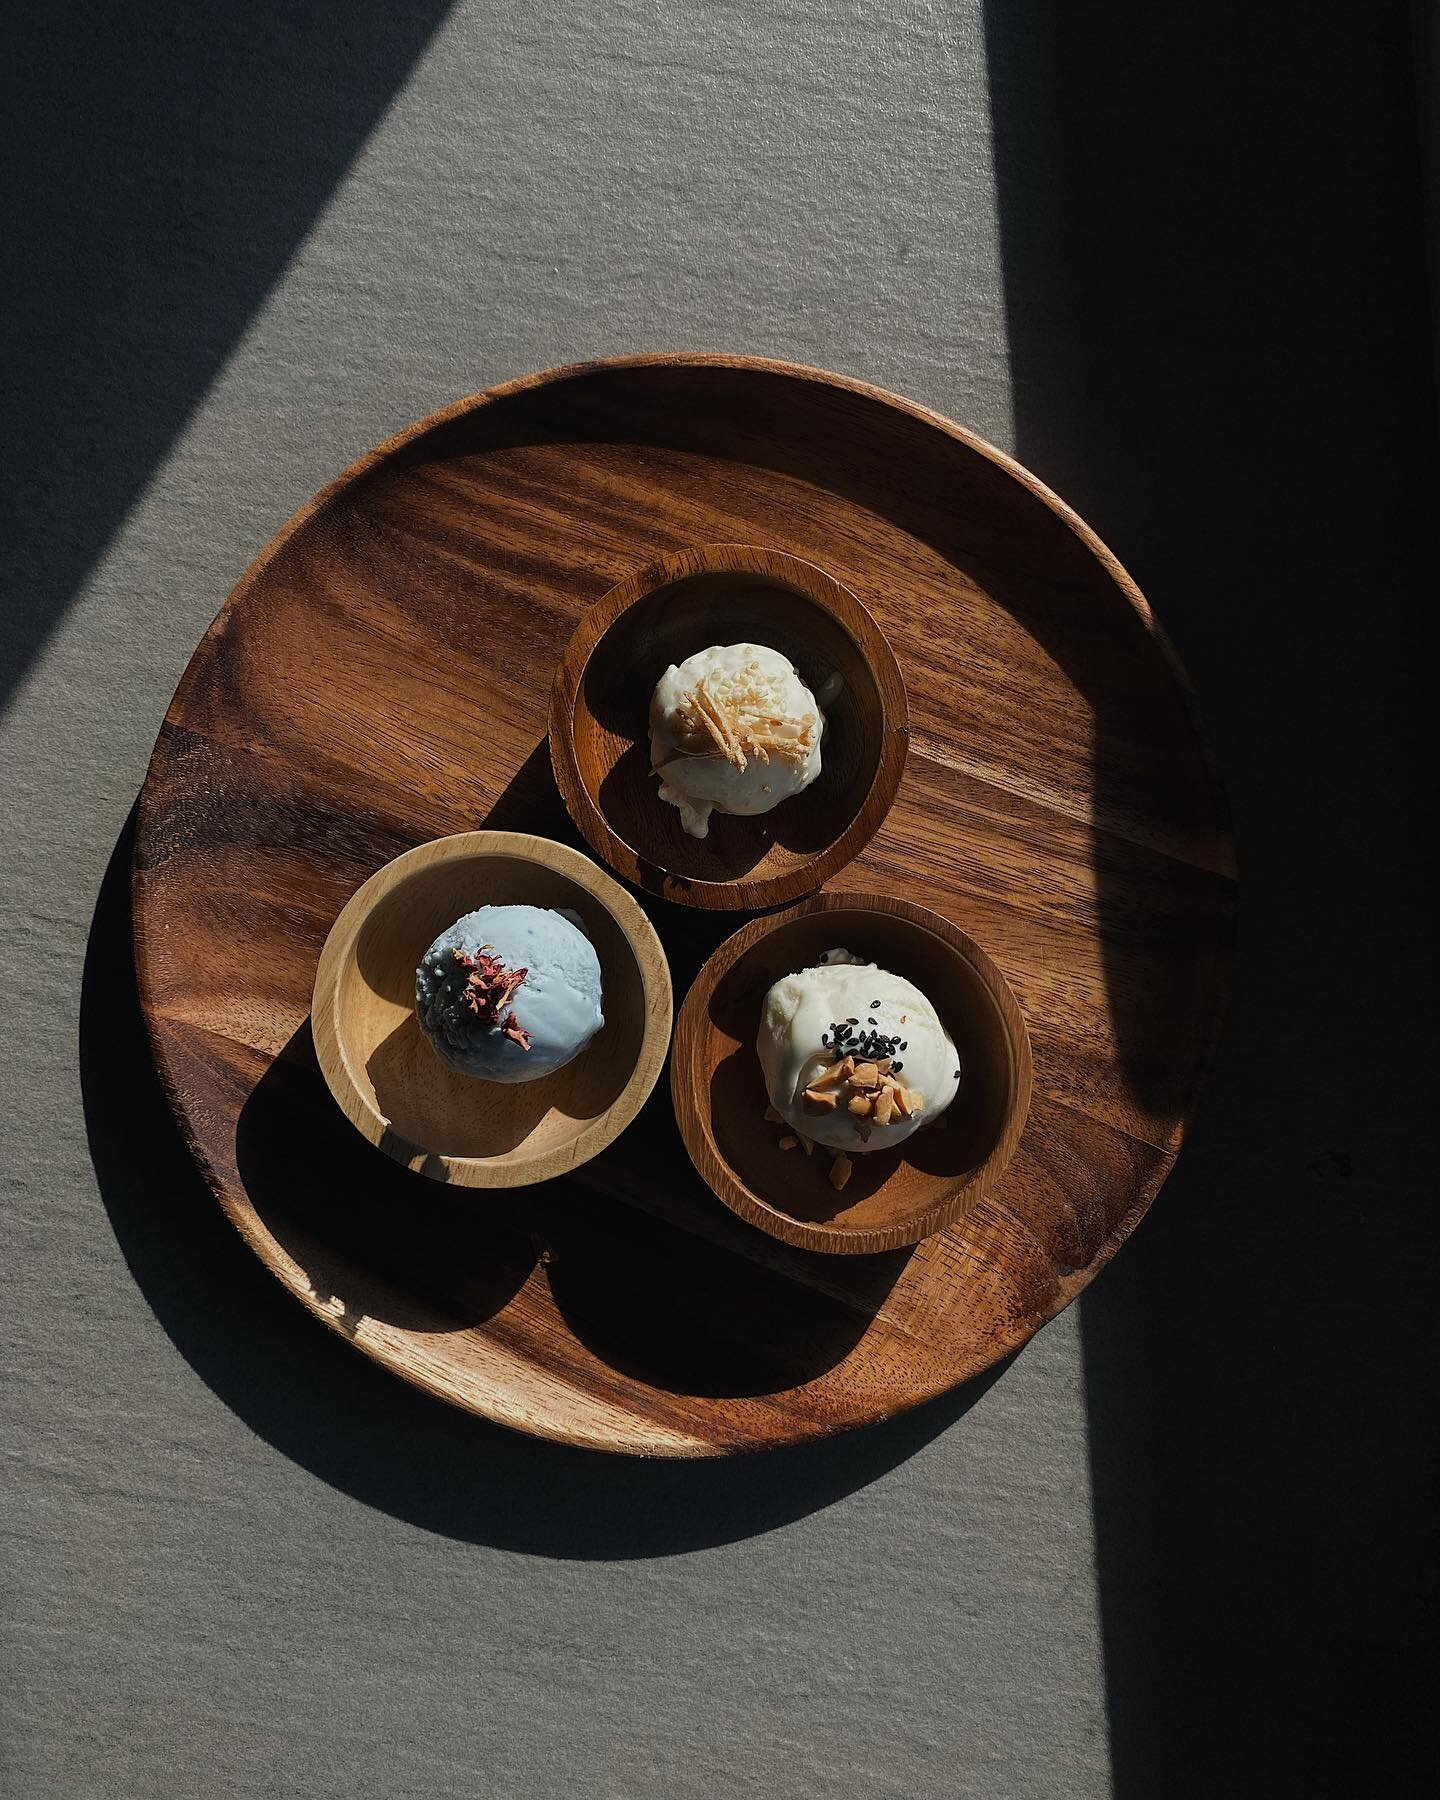 Satisfy your sweet tooth and take your taste buds on a journey with Brine's Gelato Tasting Trio. Enjoy the floral notes of Blue Pea Lavender, the tangy kick of Preserved Orange Peel, and the classic sweetness of Vanilla Sweet Cream.